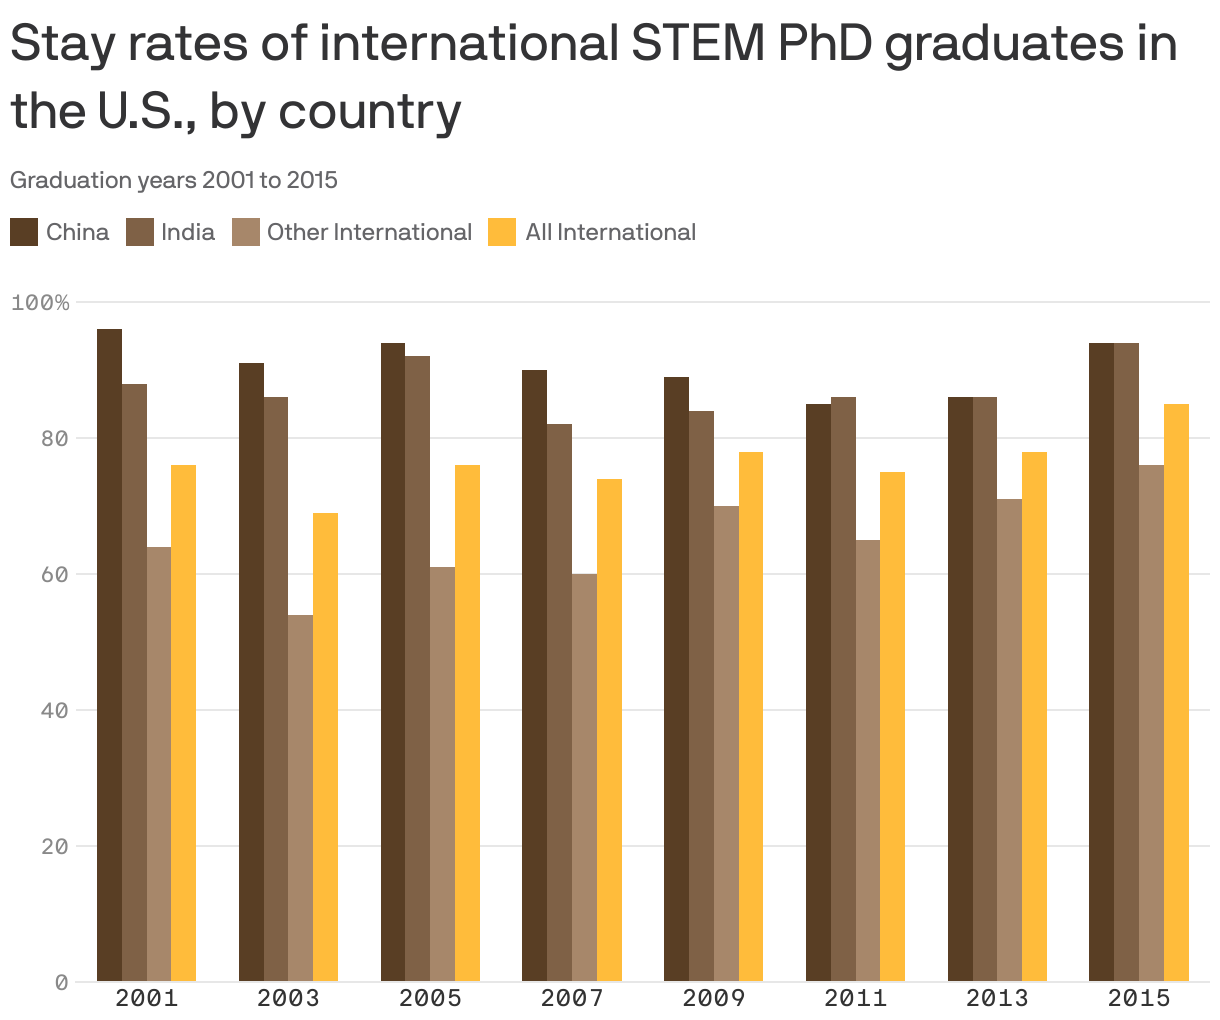 Stay rates of international STEM PhD graduates in the U.S., by country